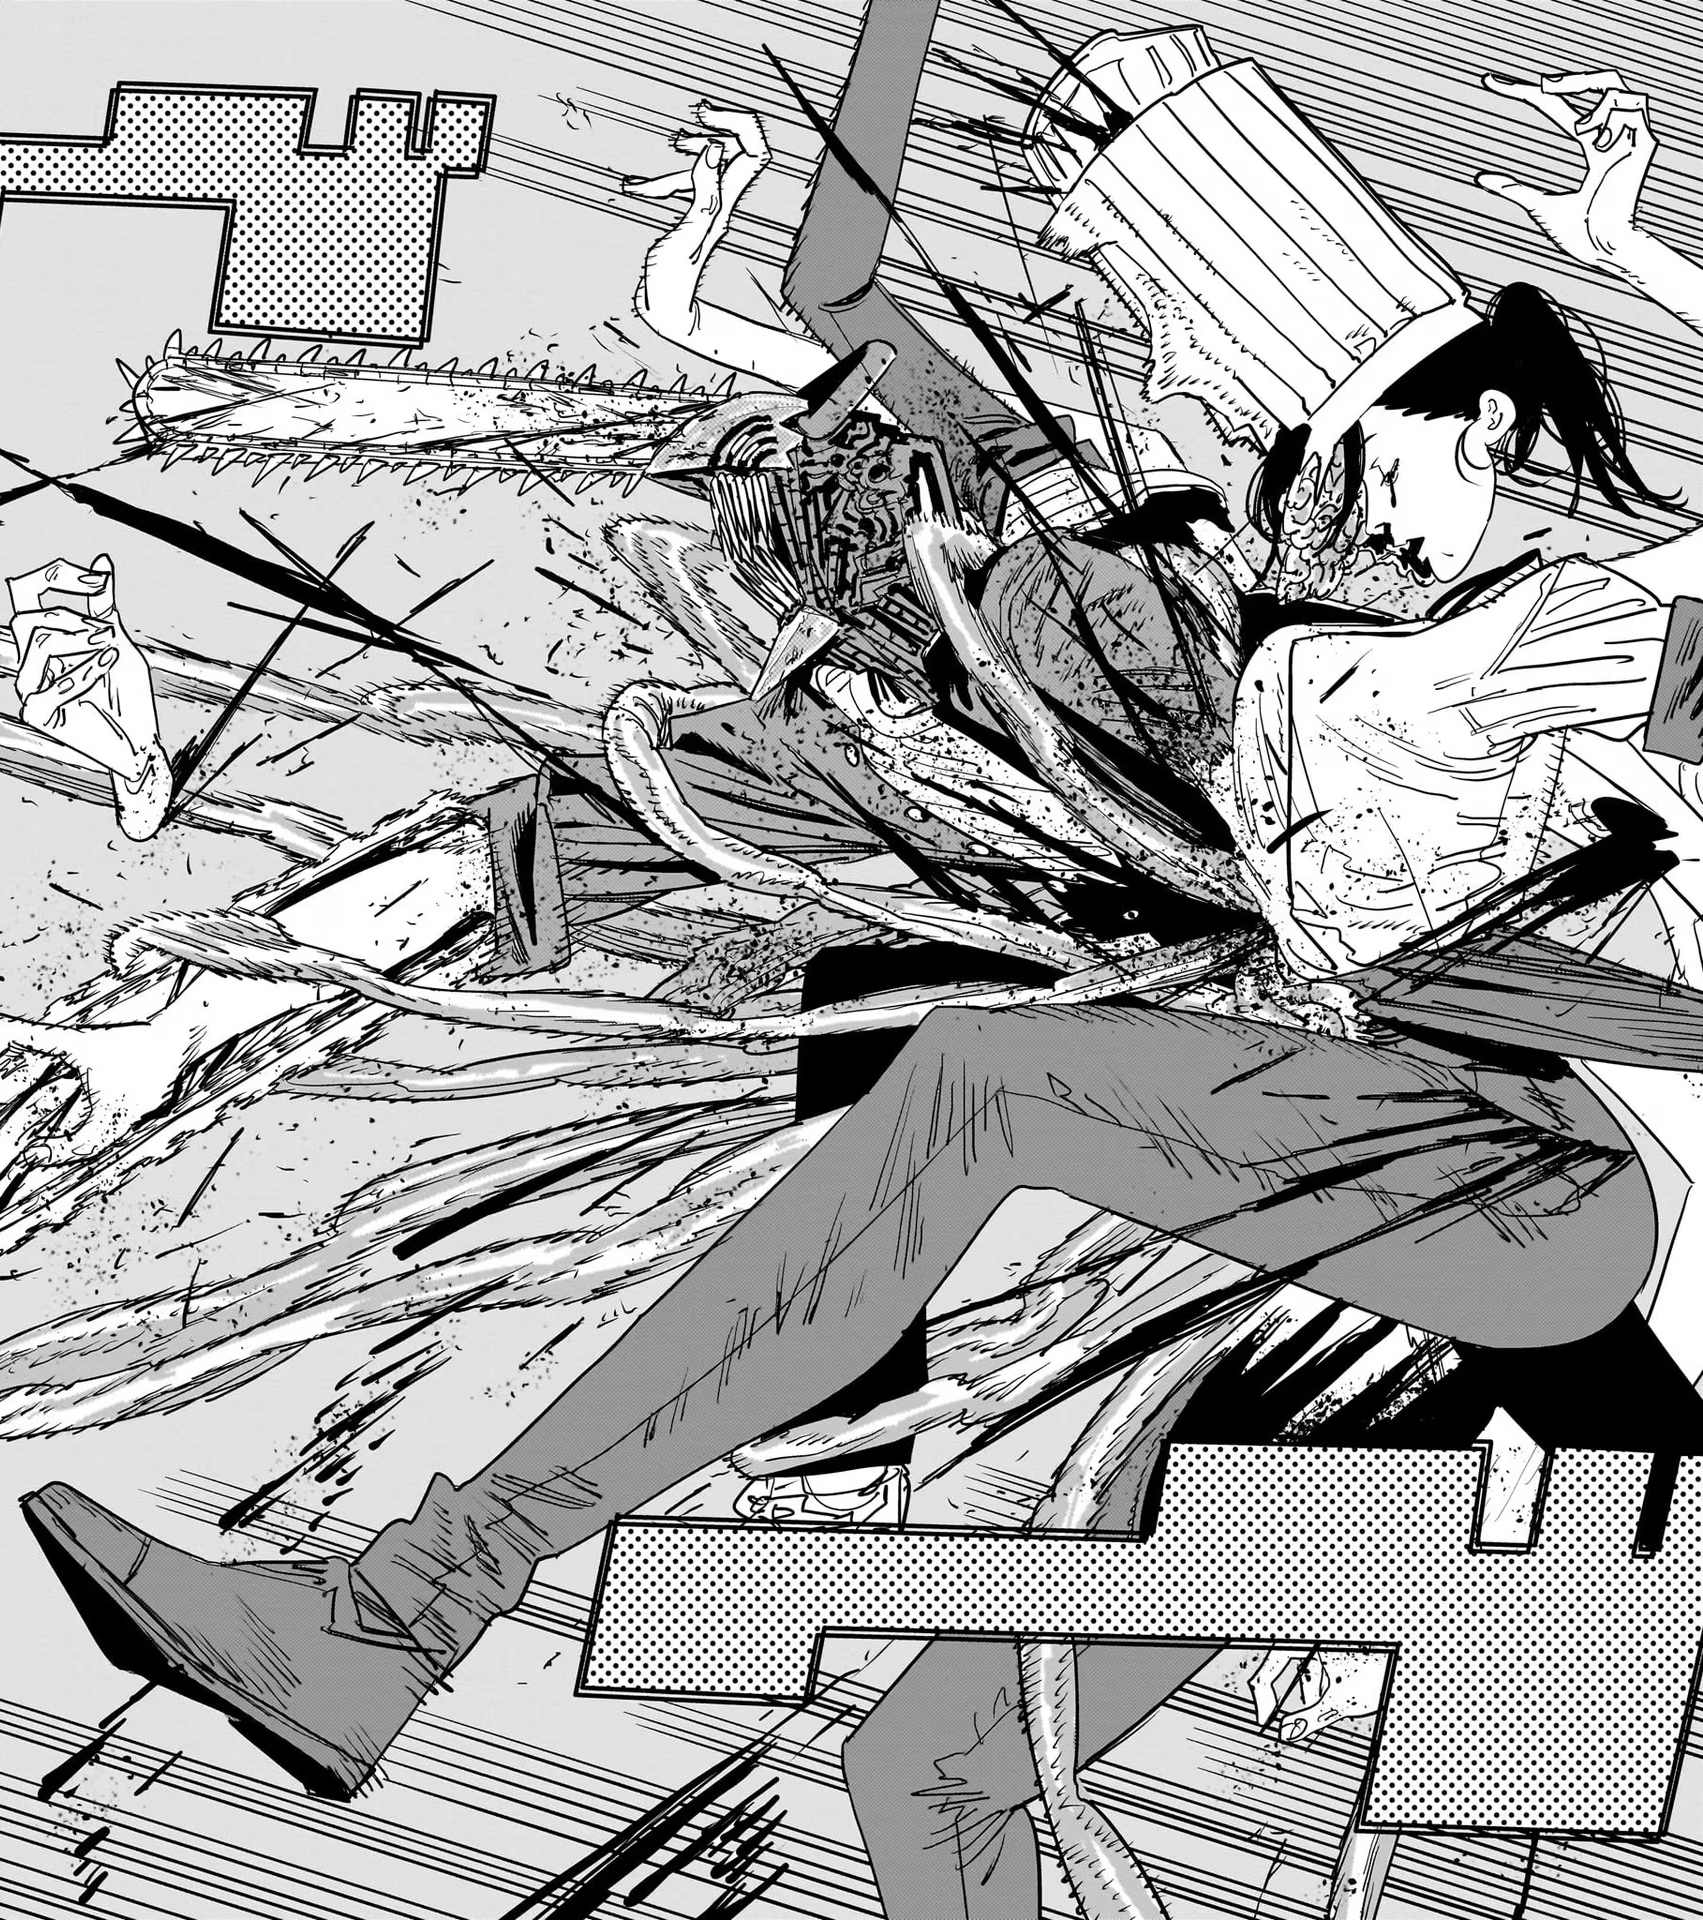 Chainsaw Man: Nayuta's Arc Is One of the Manga's Best Surprises